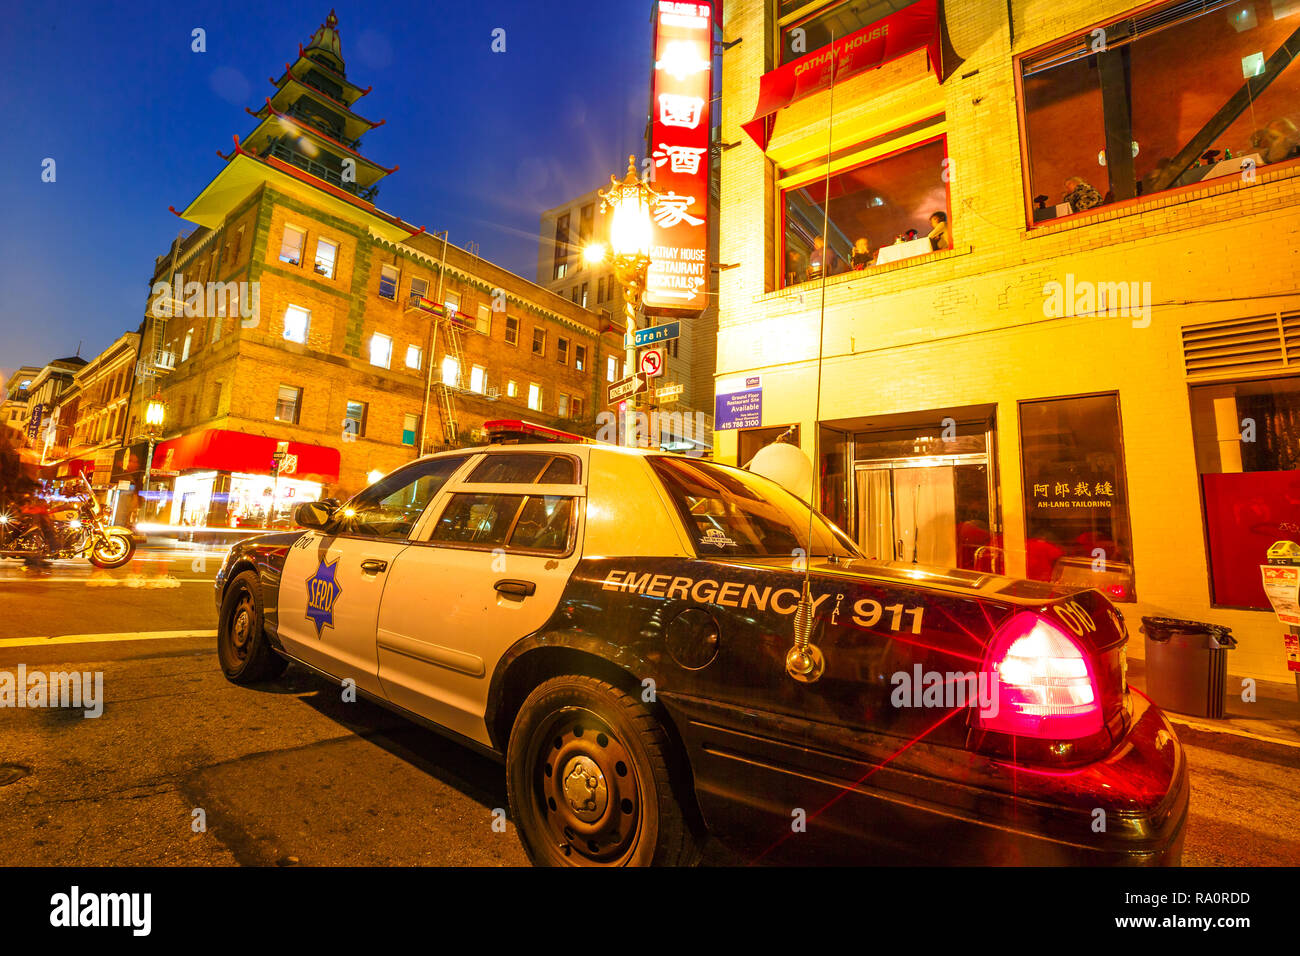 San Francisco, California, United States - August 16, 2016: wide angle view of police car with flashing lights on a street in Chinatown in San Francisco by night. Urban street view. Stock Photo